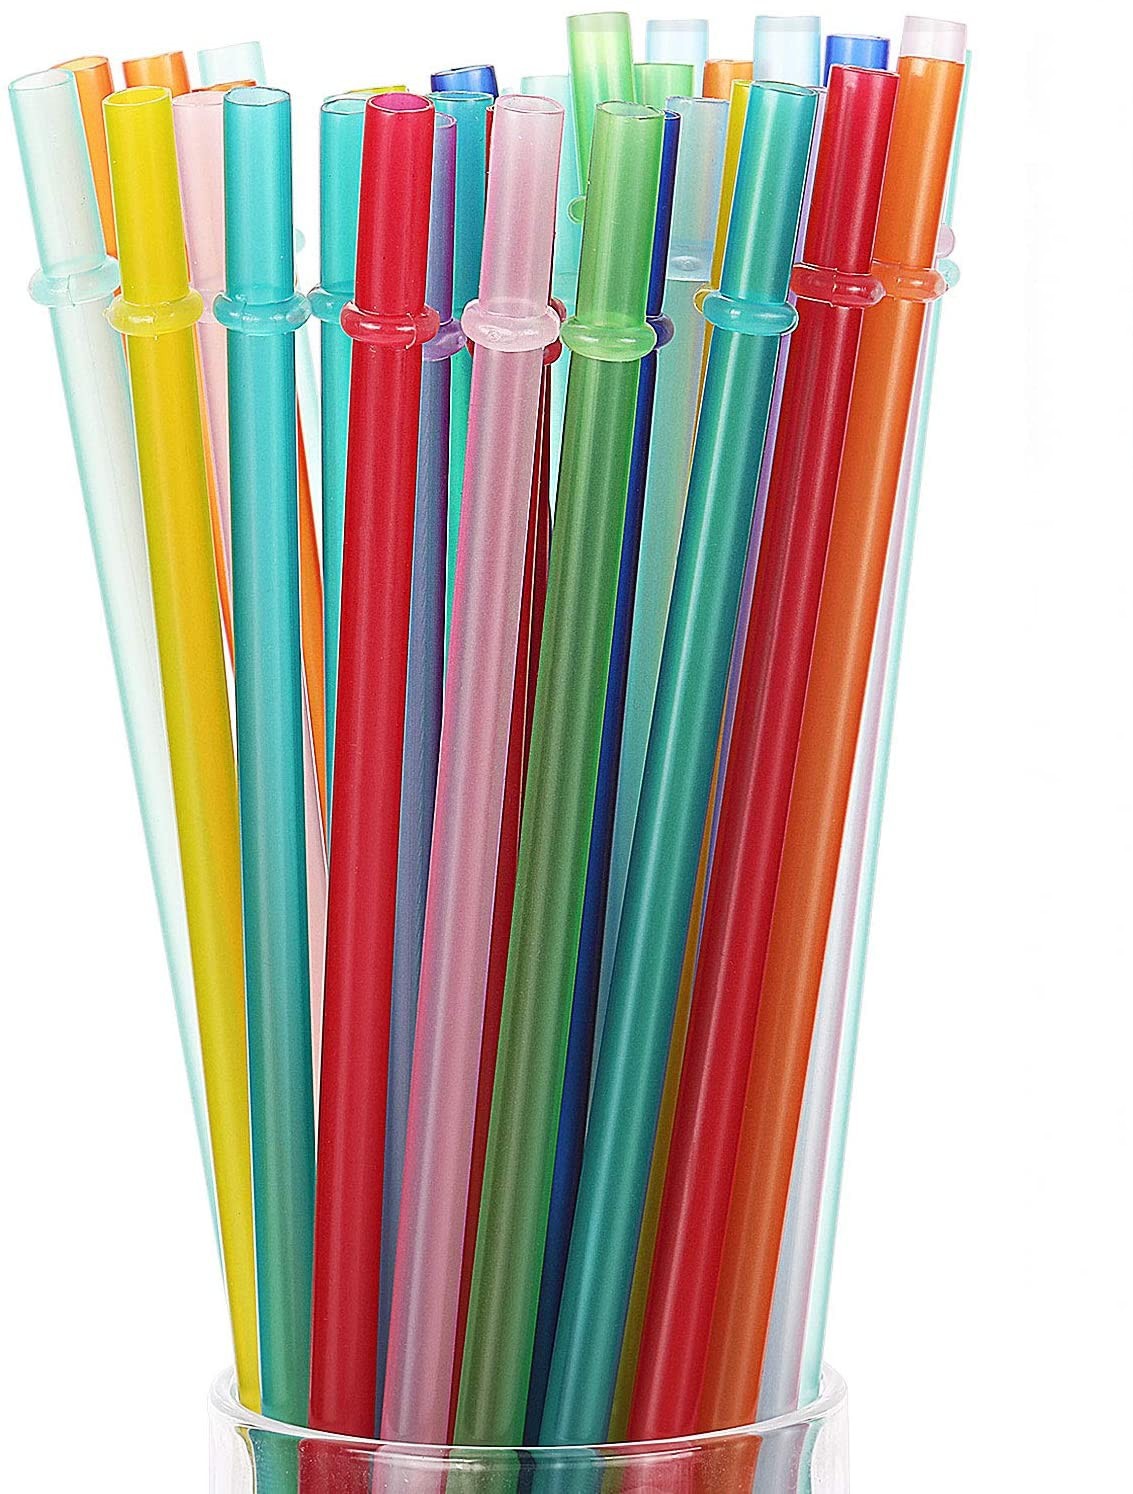 24cm PP Plastic Straws, Reusable, Environmentally Friendly Material, Multi-color For 20oz Straight Cup Thermos